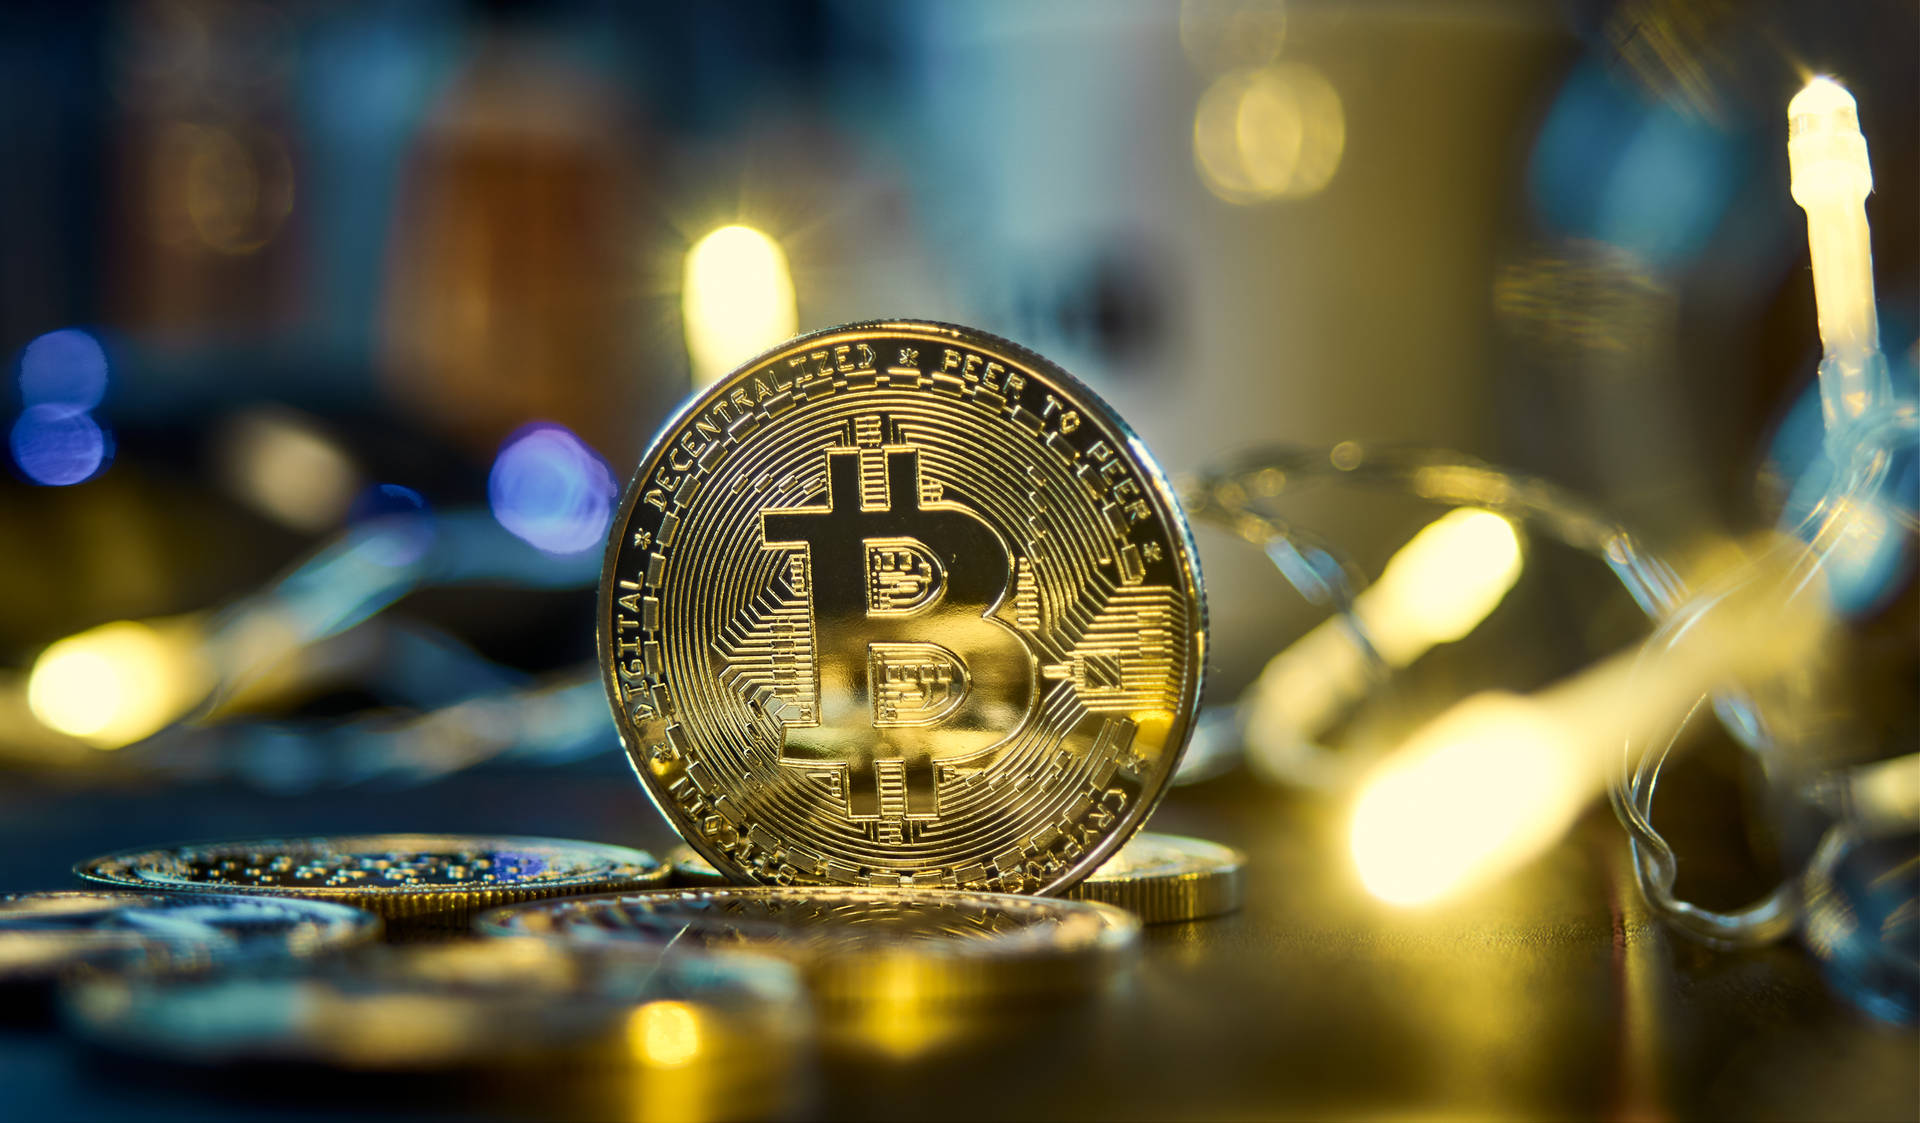 Shiny Golden Bitcoin Picture